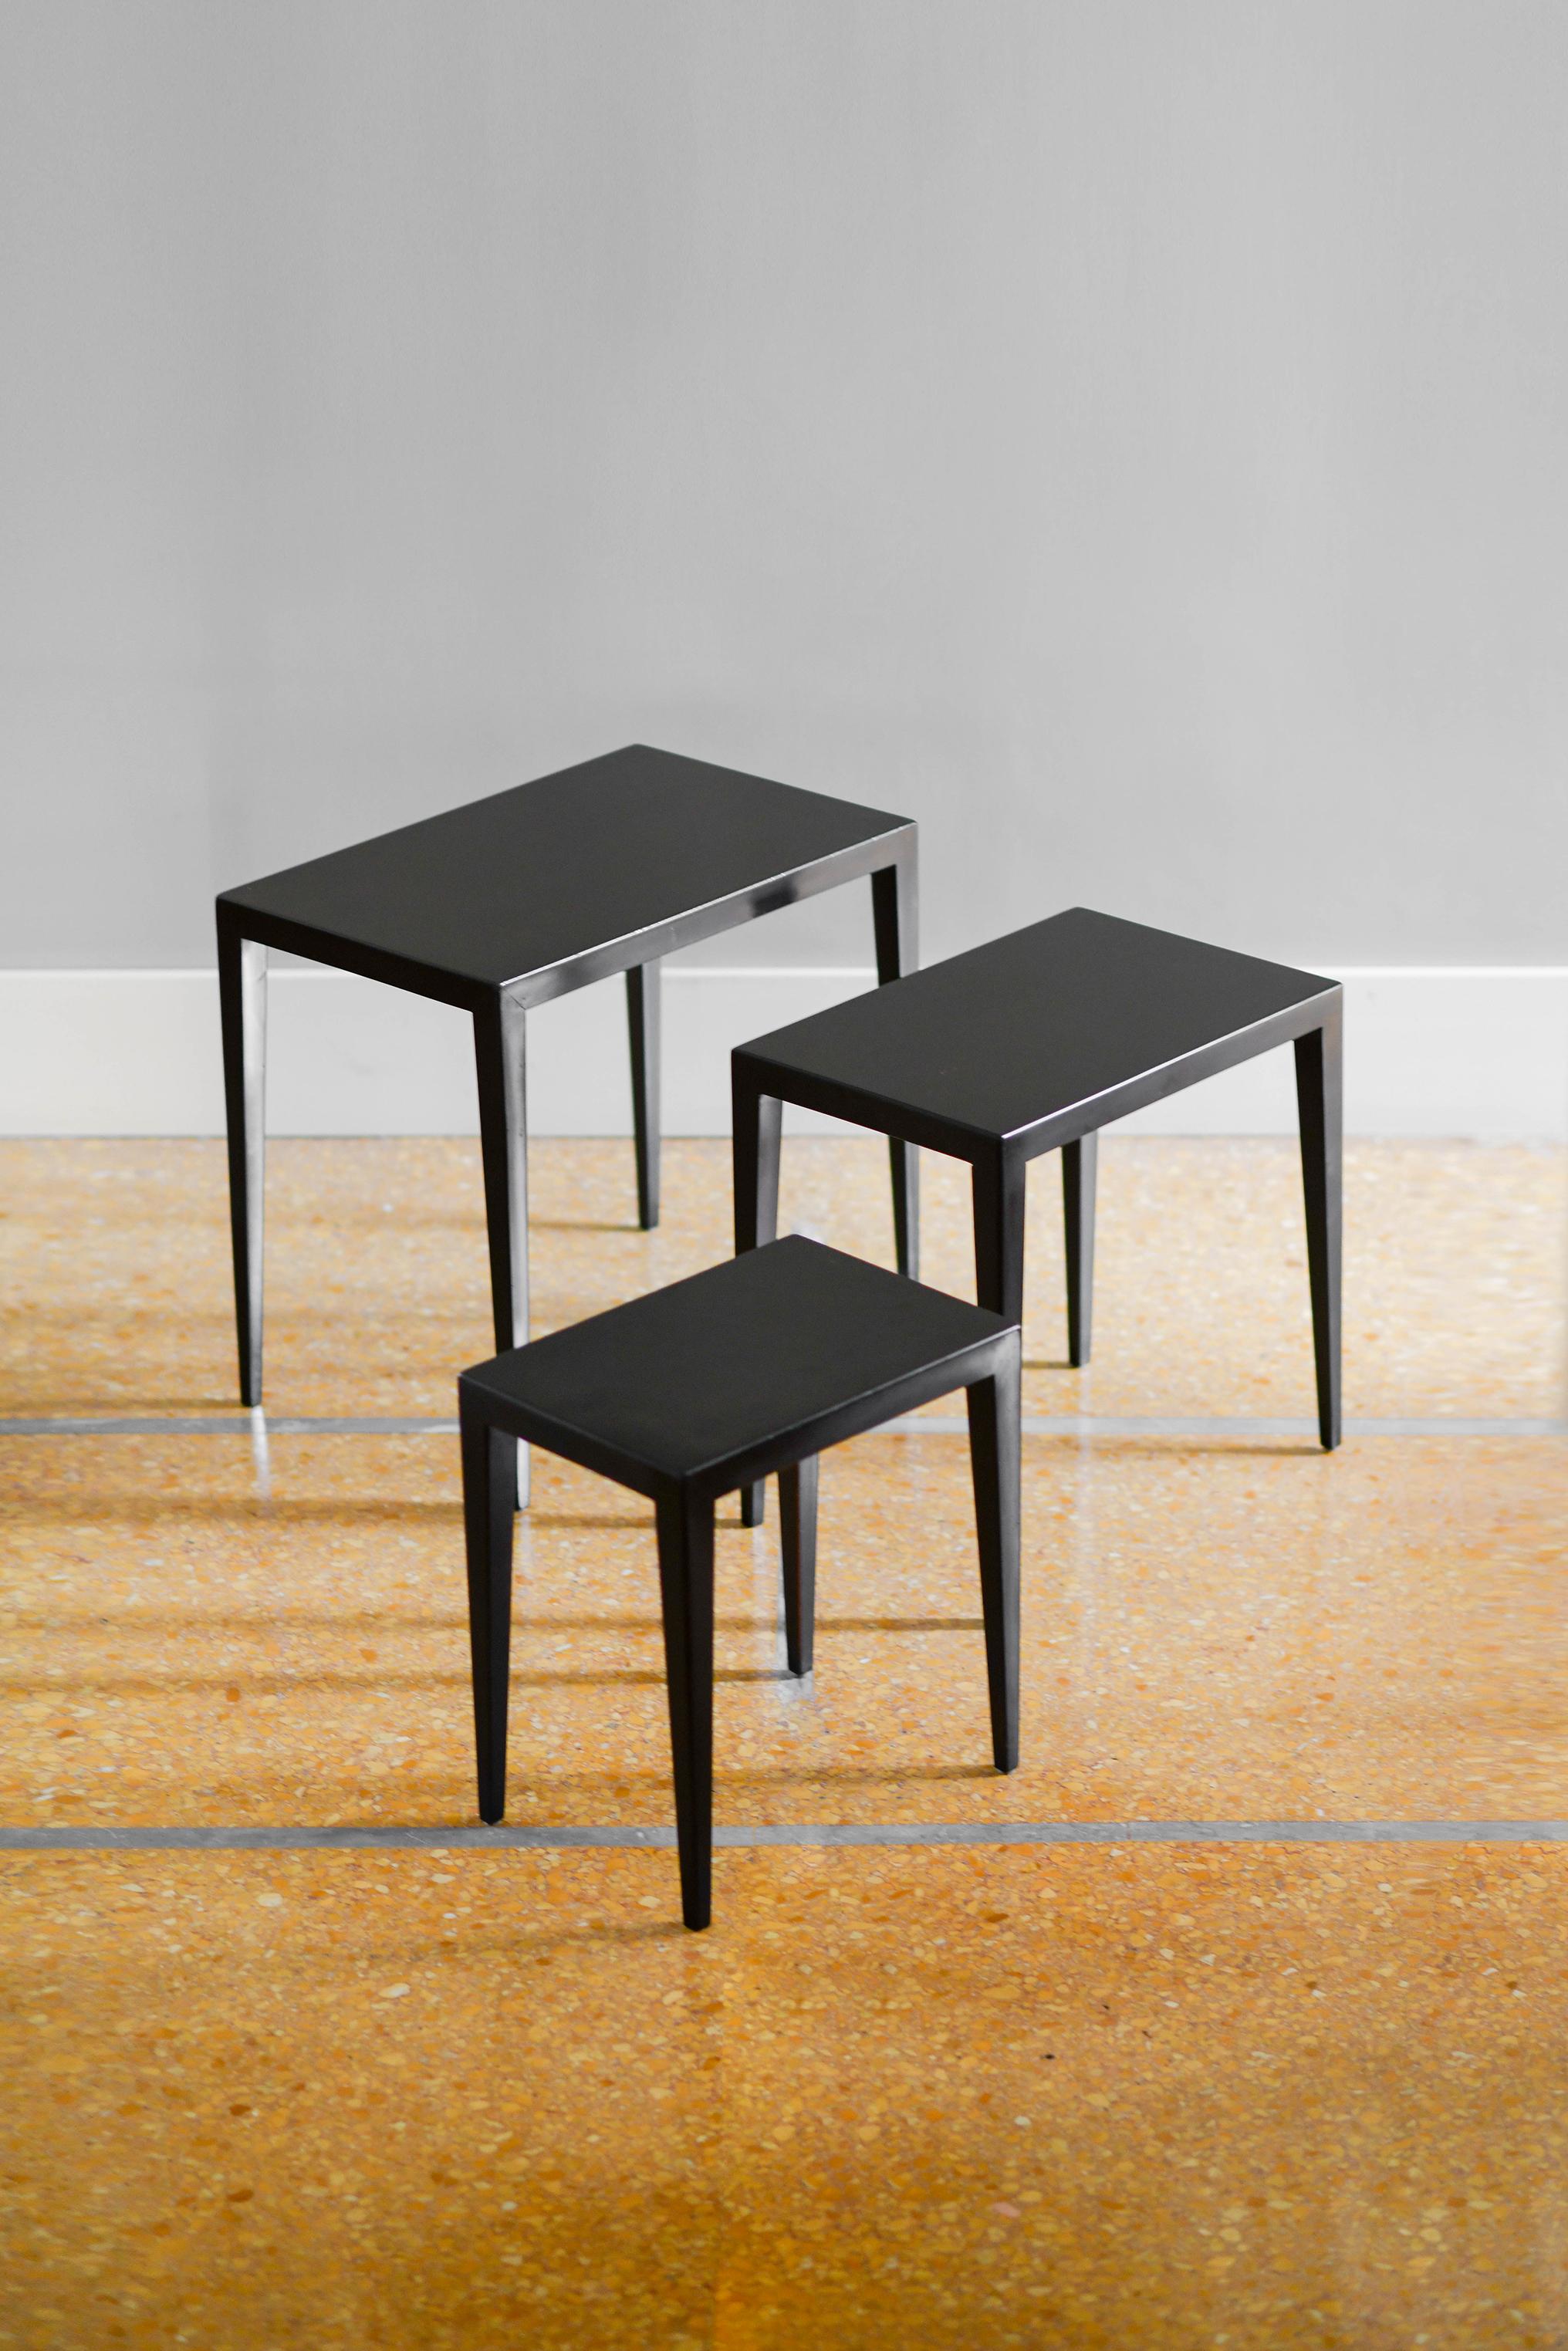 Set of three midcentury side tables by IIllums Bolighus Kobenhavn made in black lacquered wood.
Product details
Stacked tables dimensions: 56w x 50h x 35d cm
Materials: wood.
Production: Scandinavian production 1950-1960.